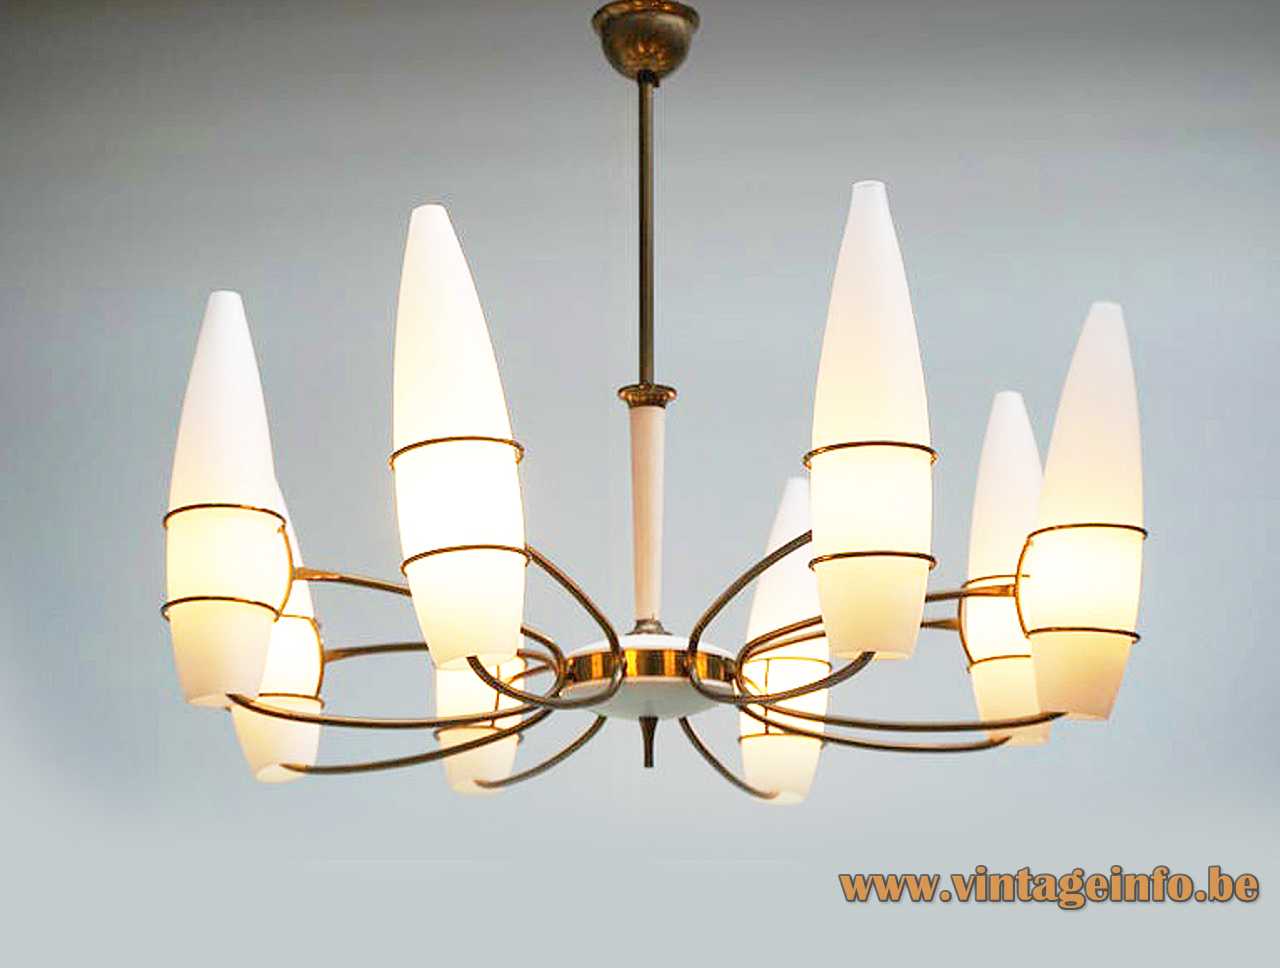 1960s opal cones chandelier curved brass rods white frosted glass lampshades 1950s Massive Belgium E14 sockets